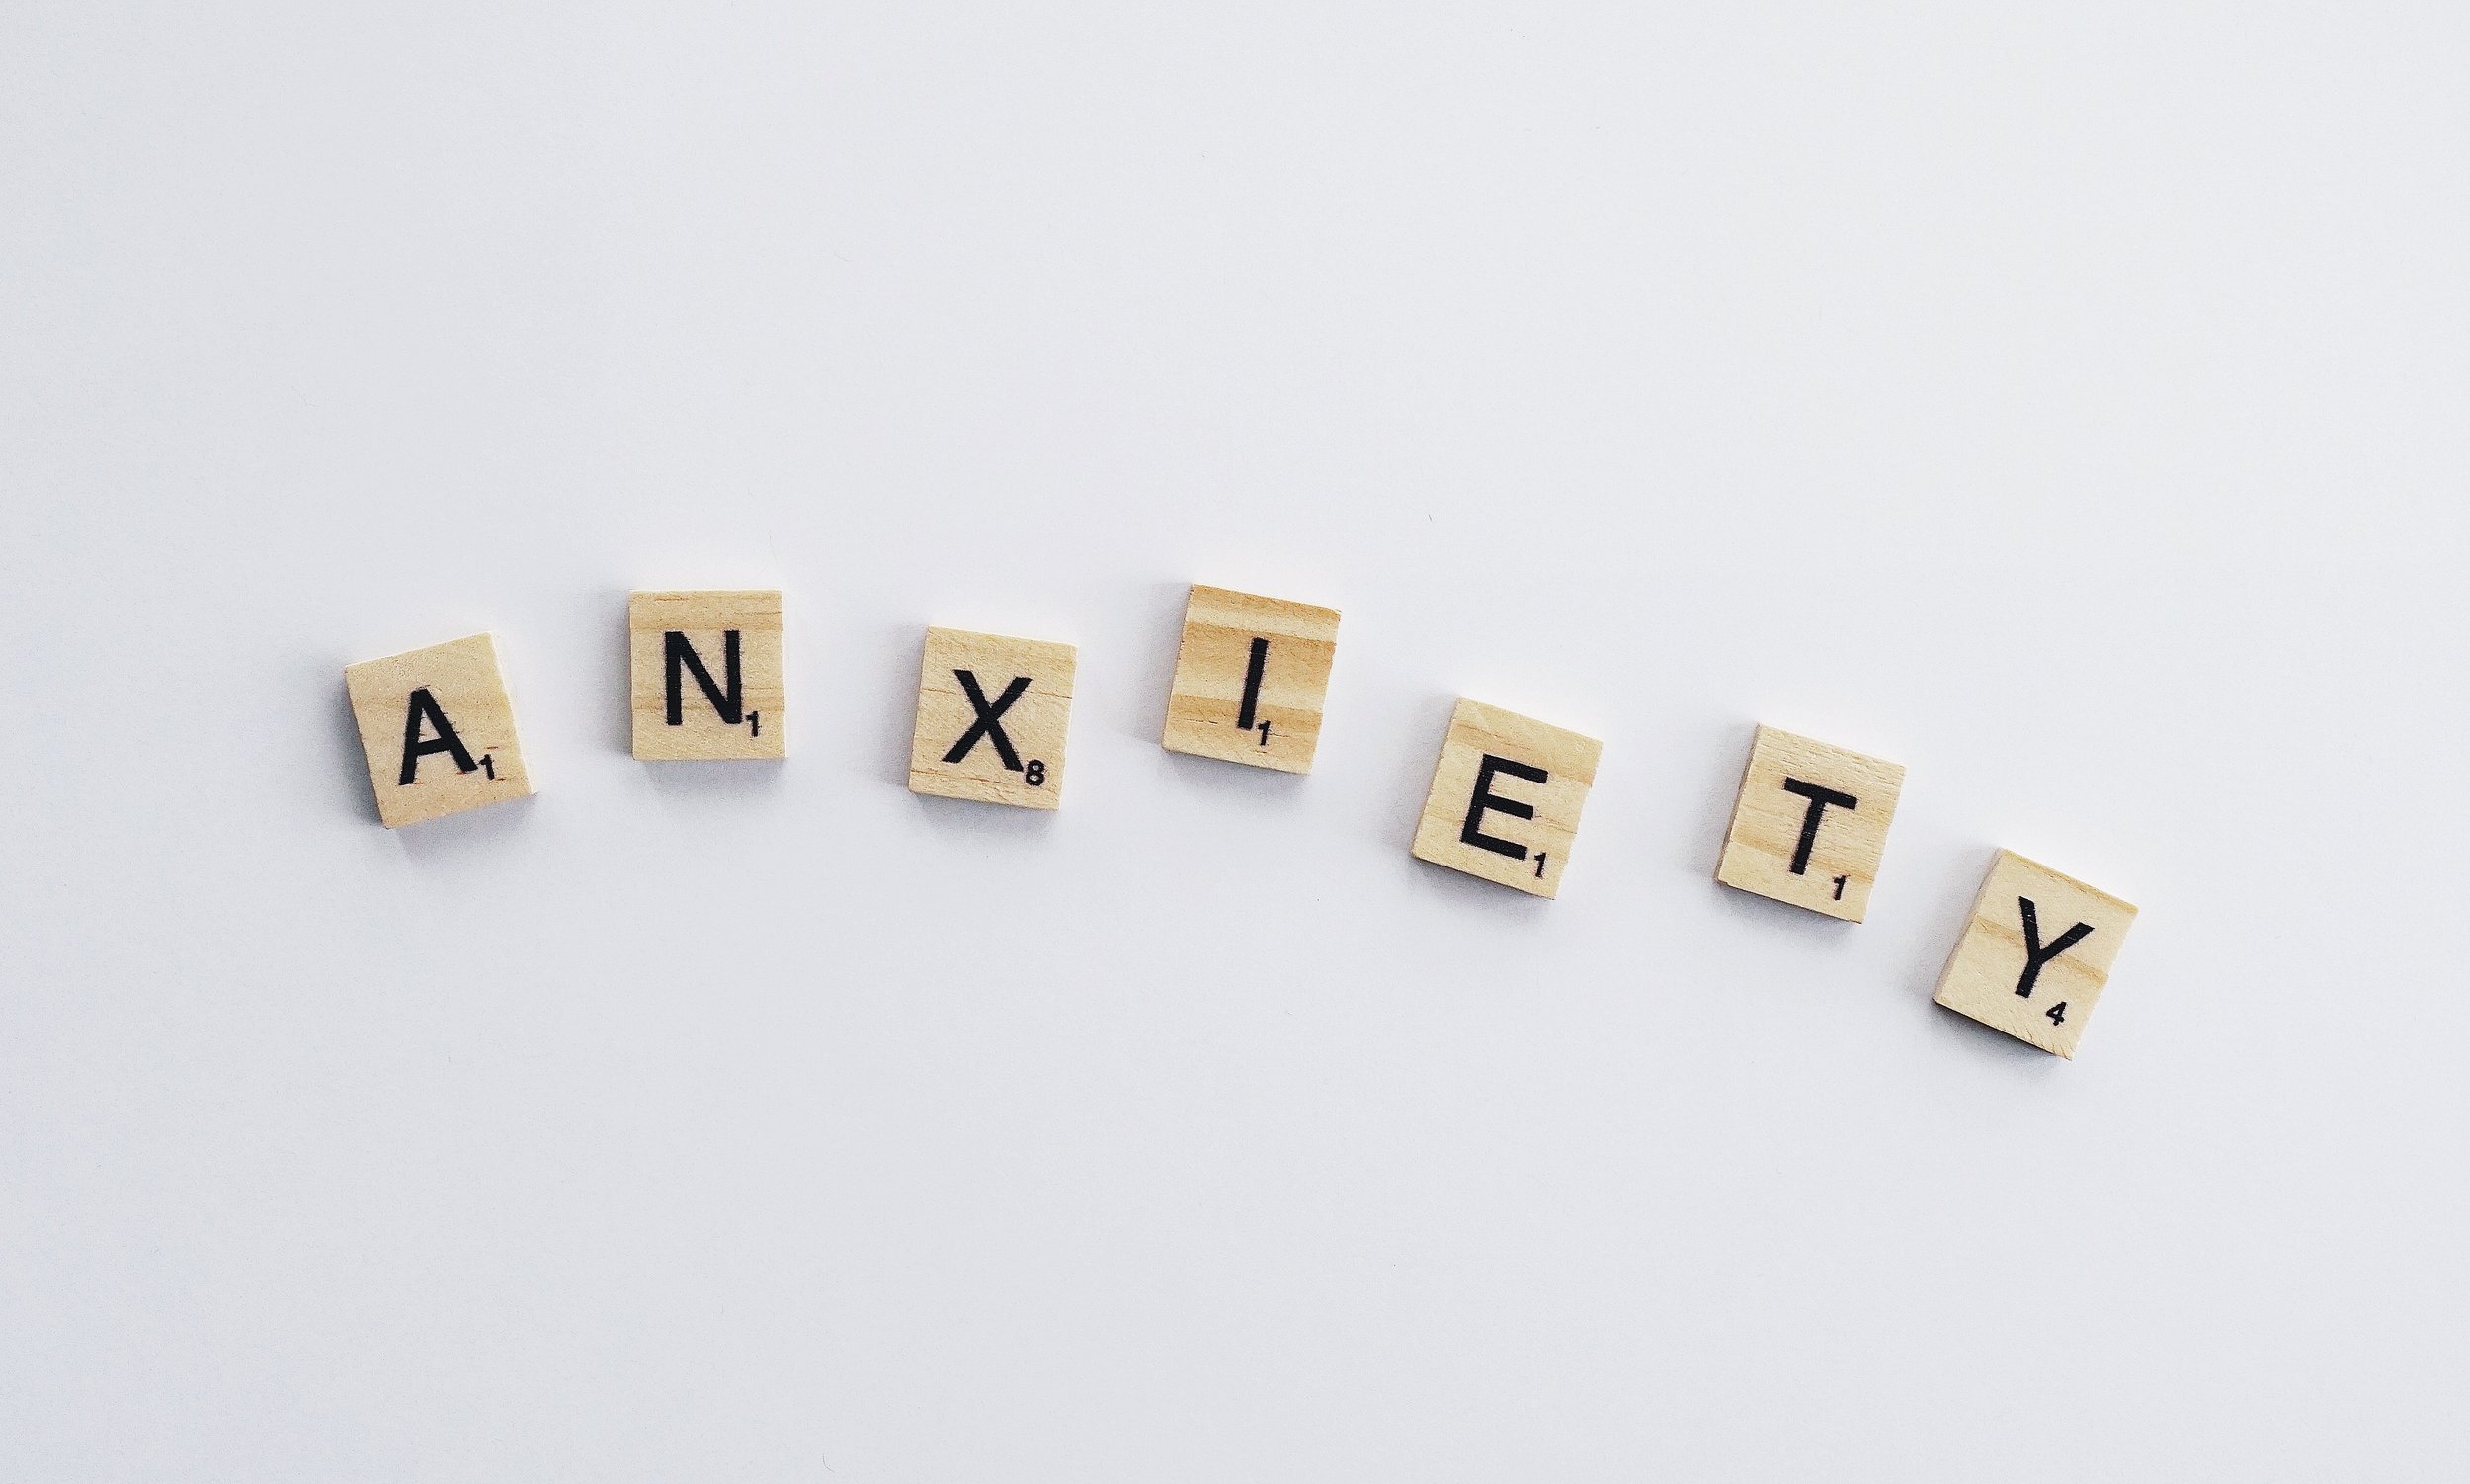 Best Supplements for Anxiety